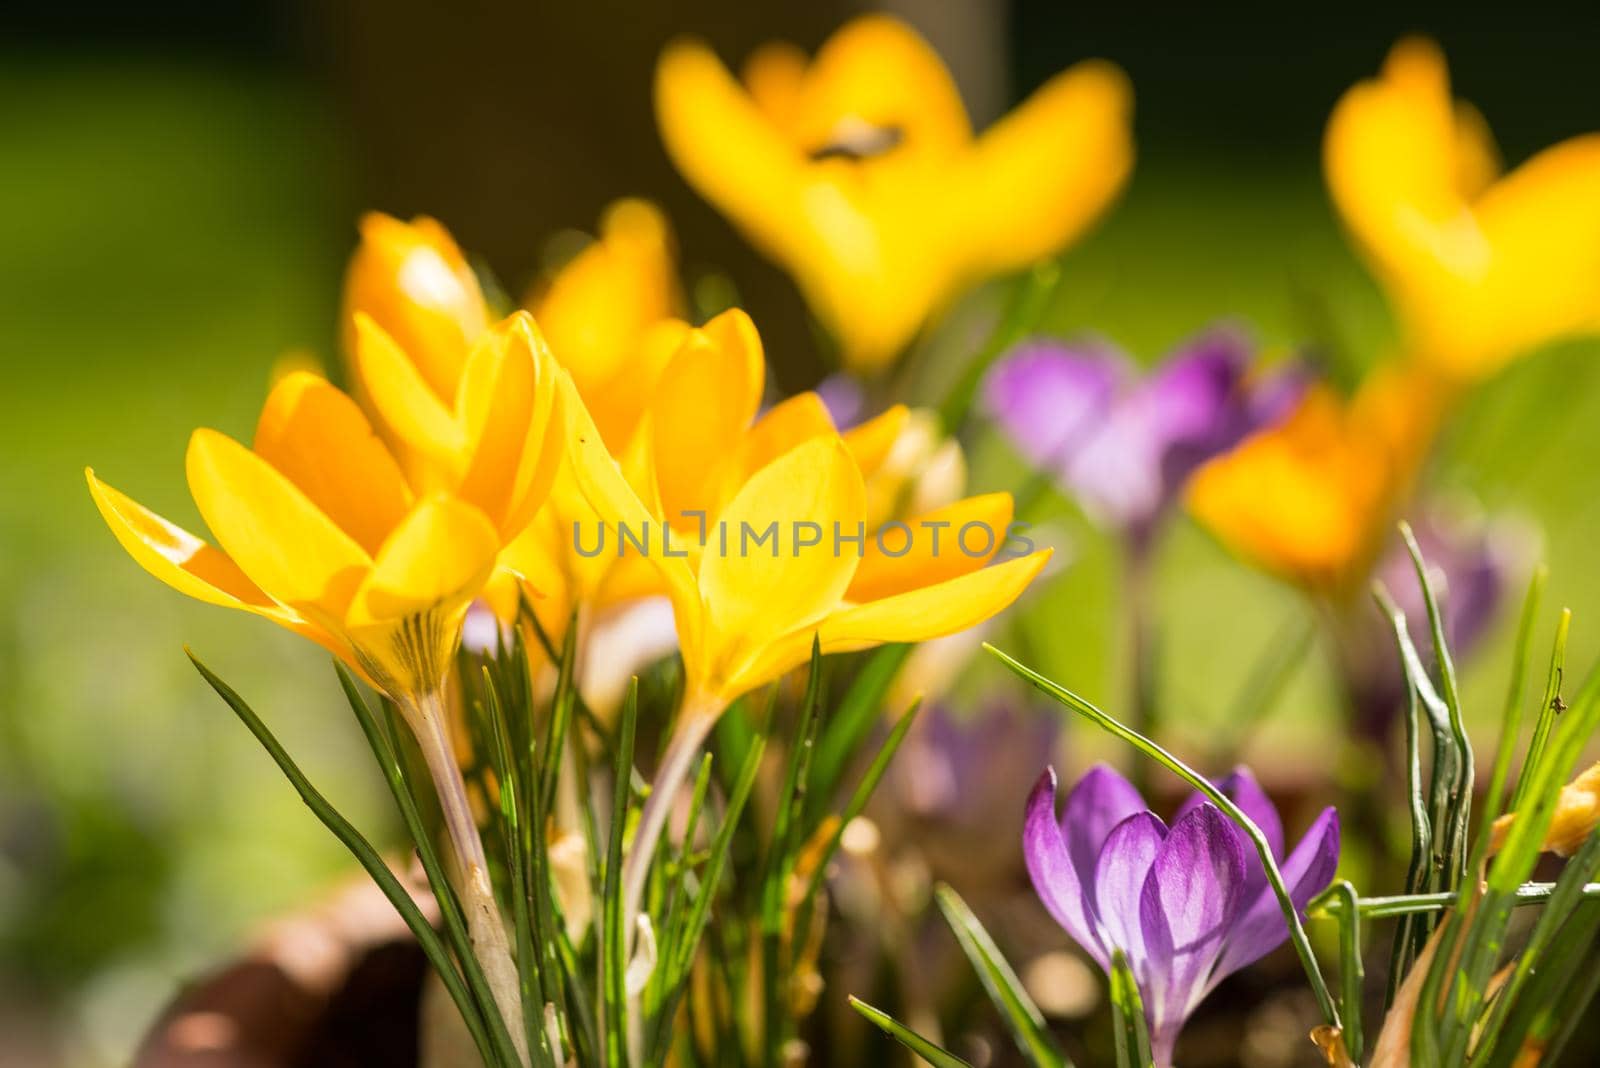 Vibrant yellow and purple spring crocusses in early morning sunlight by LeoniekvanderVliet